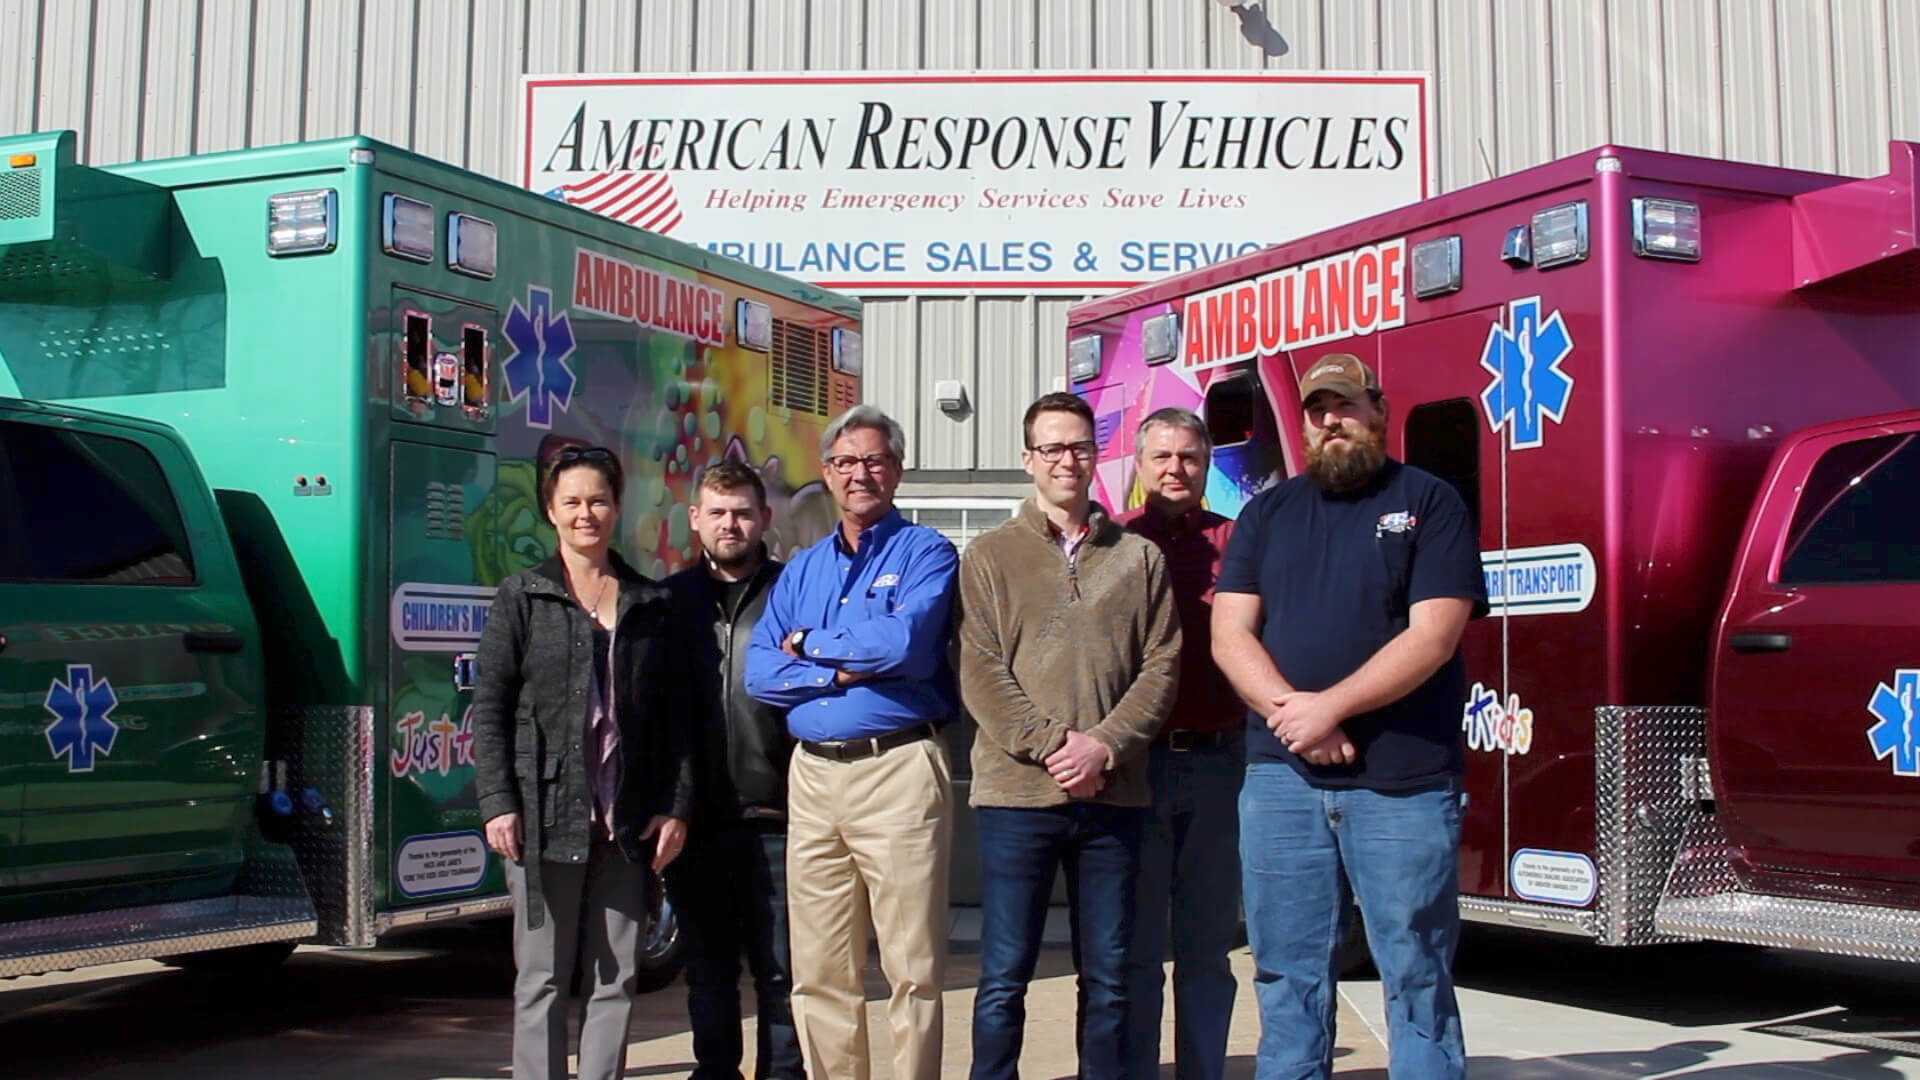 Image of people standing in front of two ambulances for American Response Vehicles for Indiana.